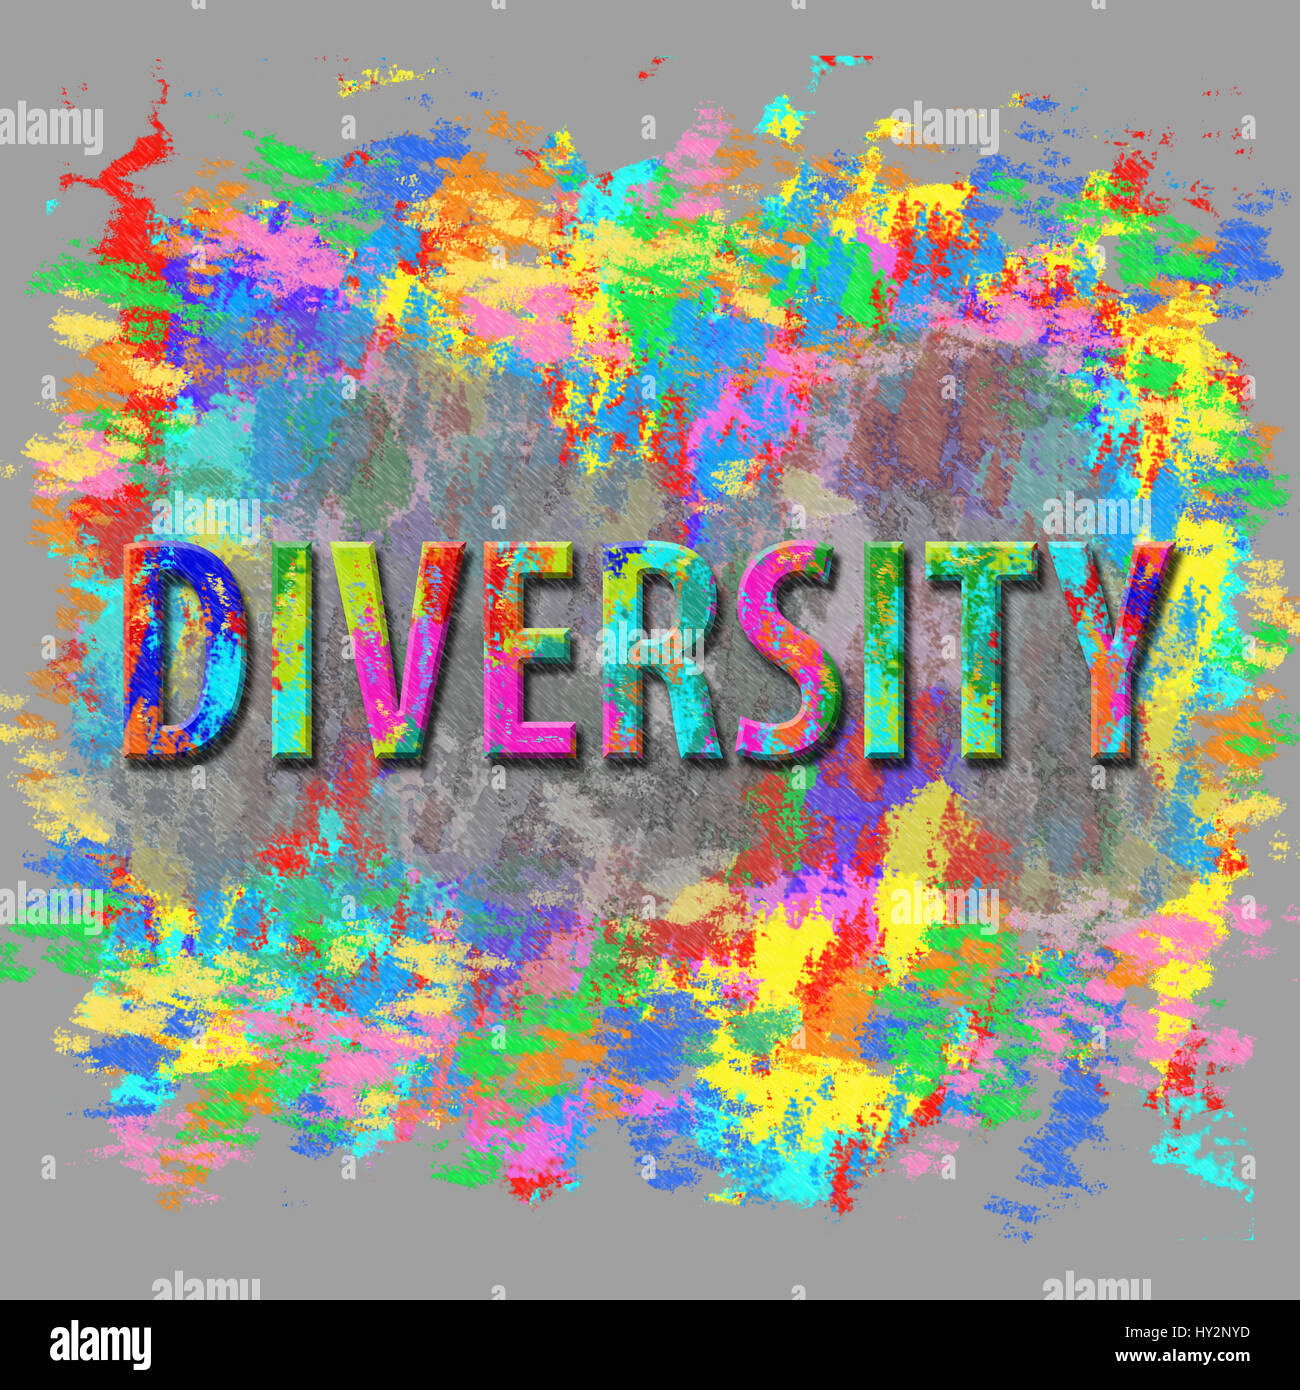 Digital 3d abstract artwork depicting dry brushed colors with the embossed word 'diversity'. Stock Photo